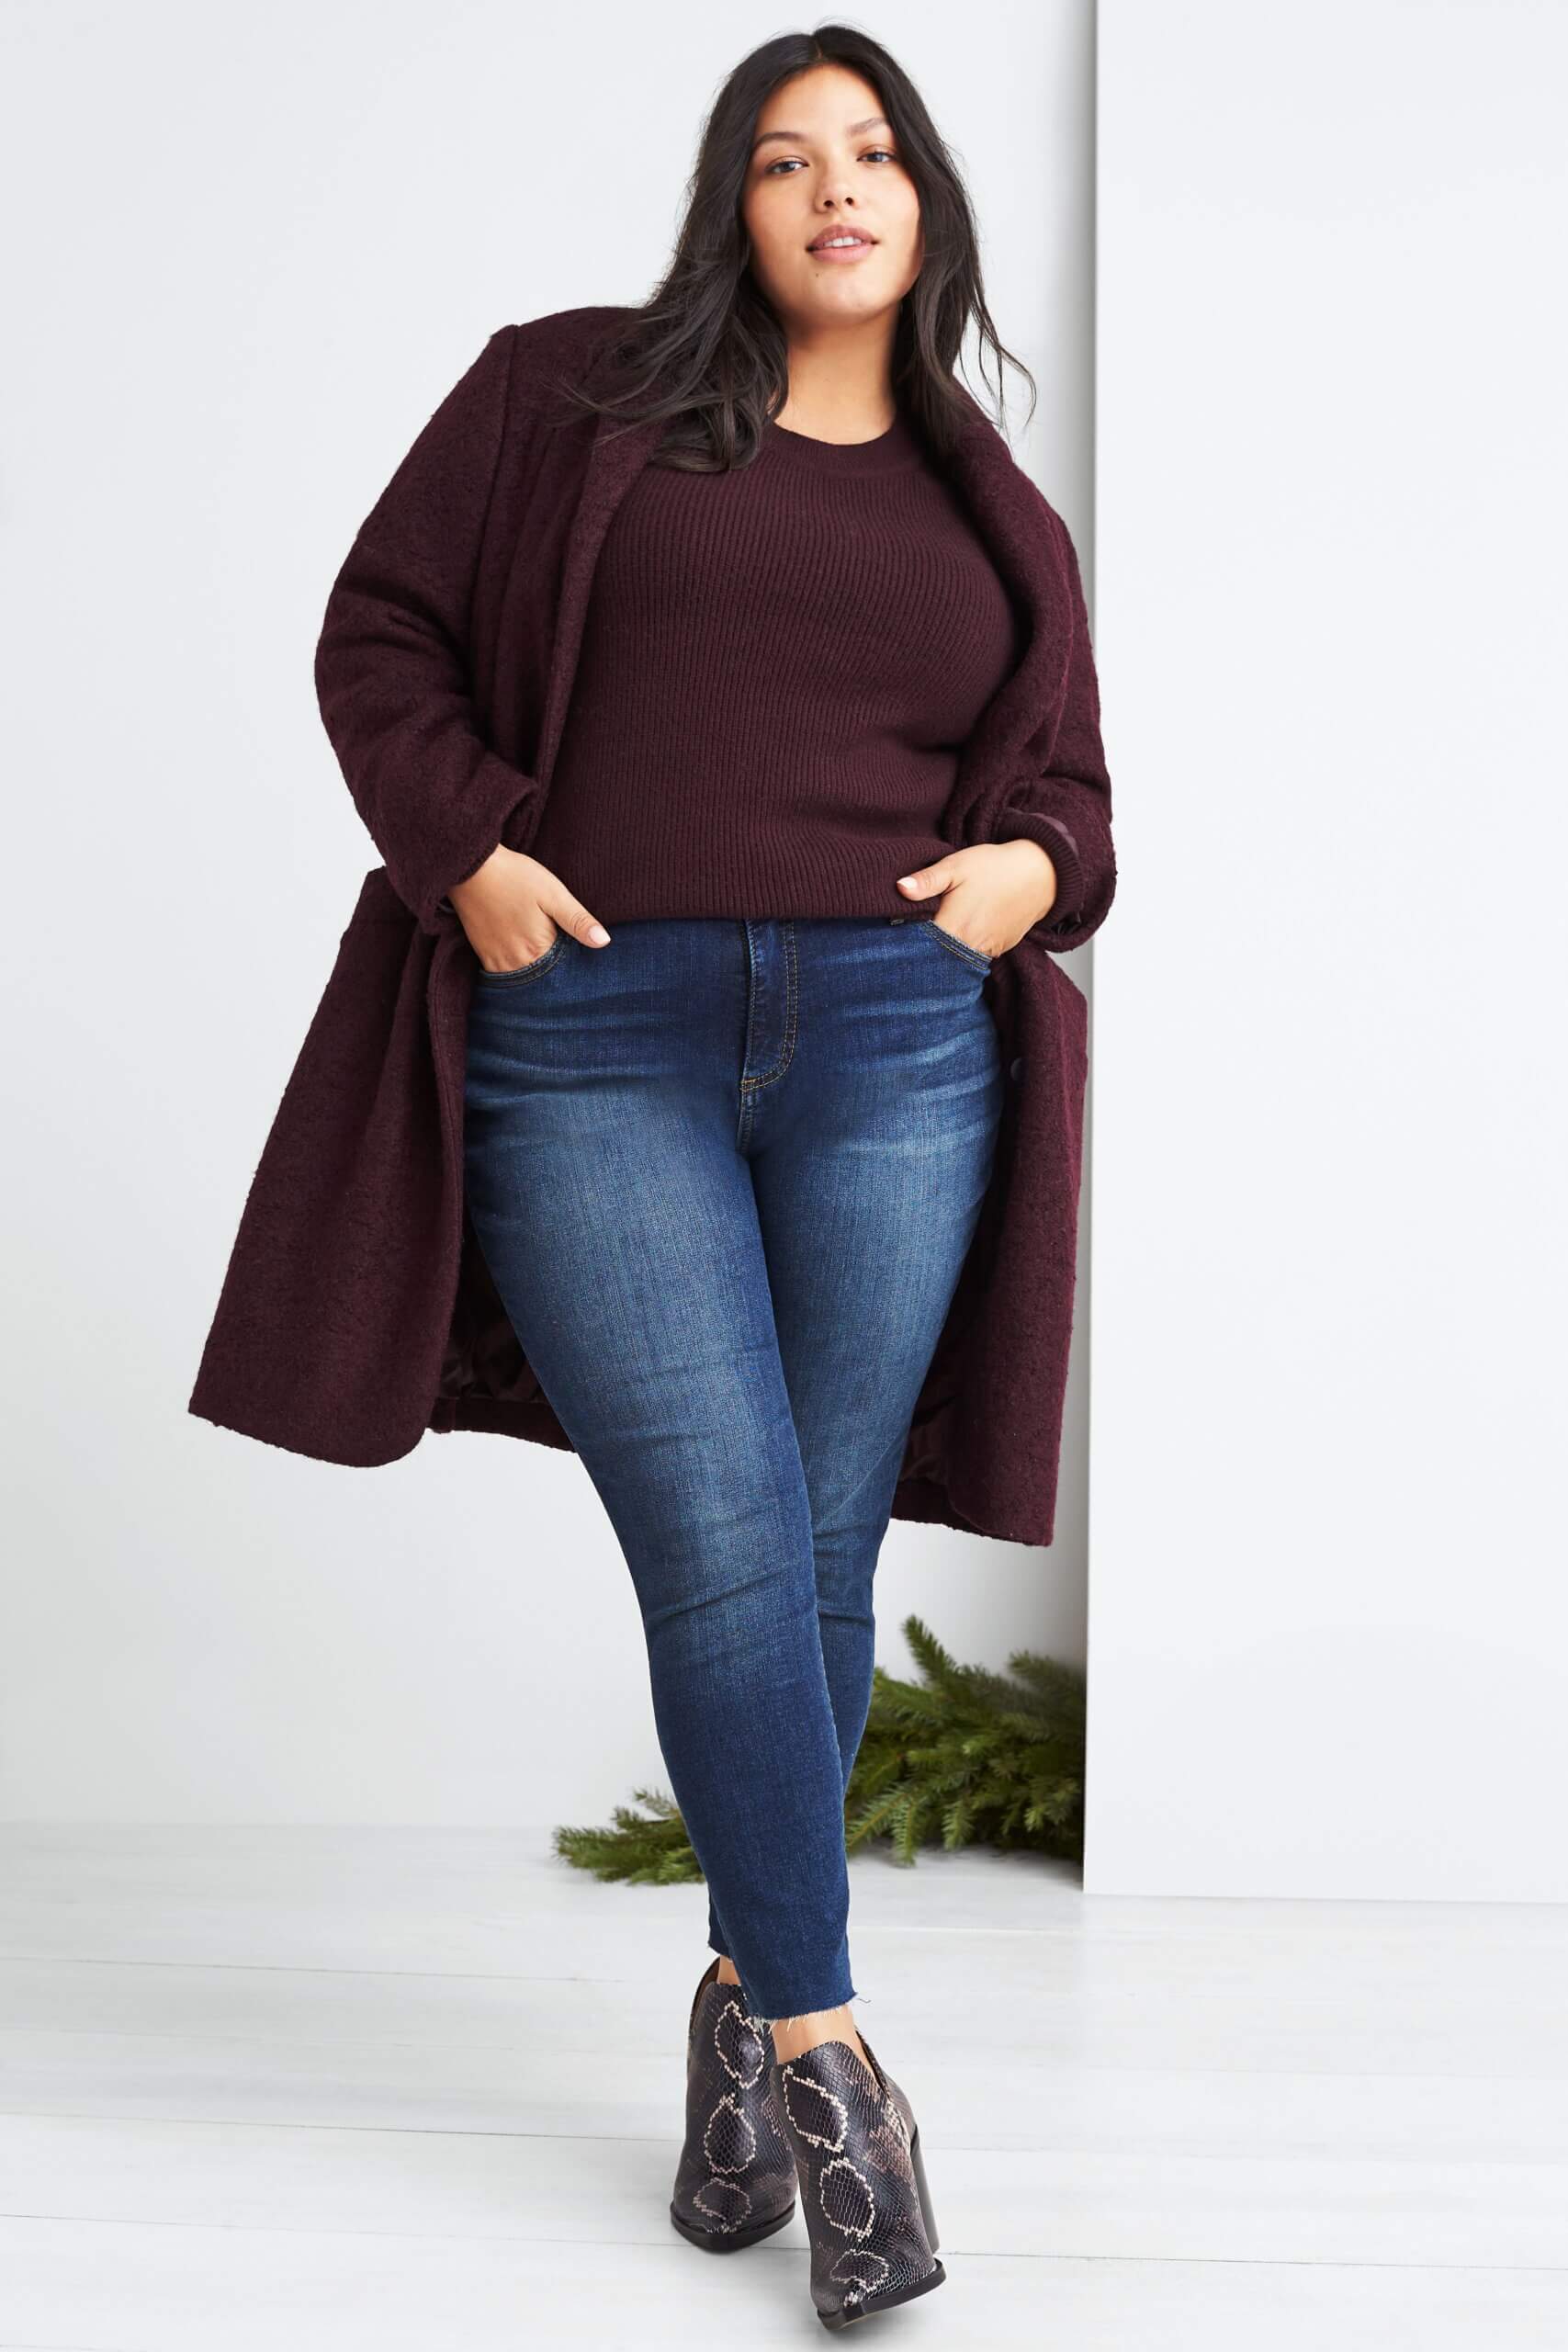 Stitch Fix women's model wearing burgundy pullover sweater, burgundy collared coat, high-rise jeans and snakeskin booties. 